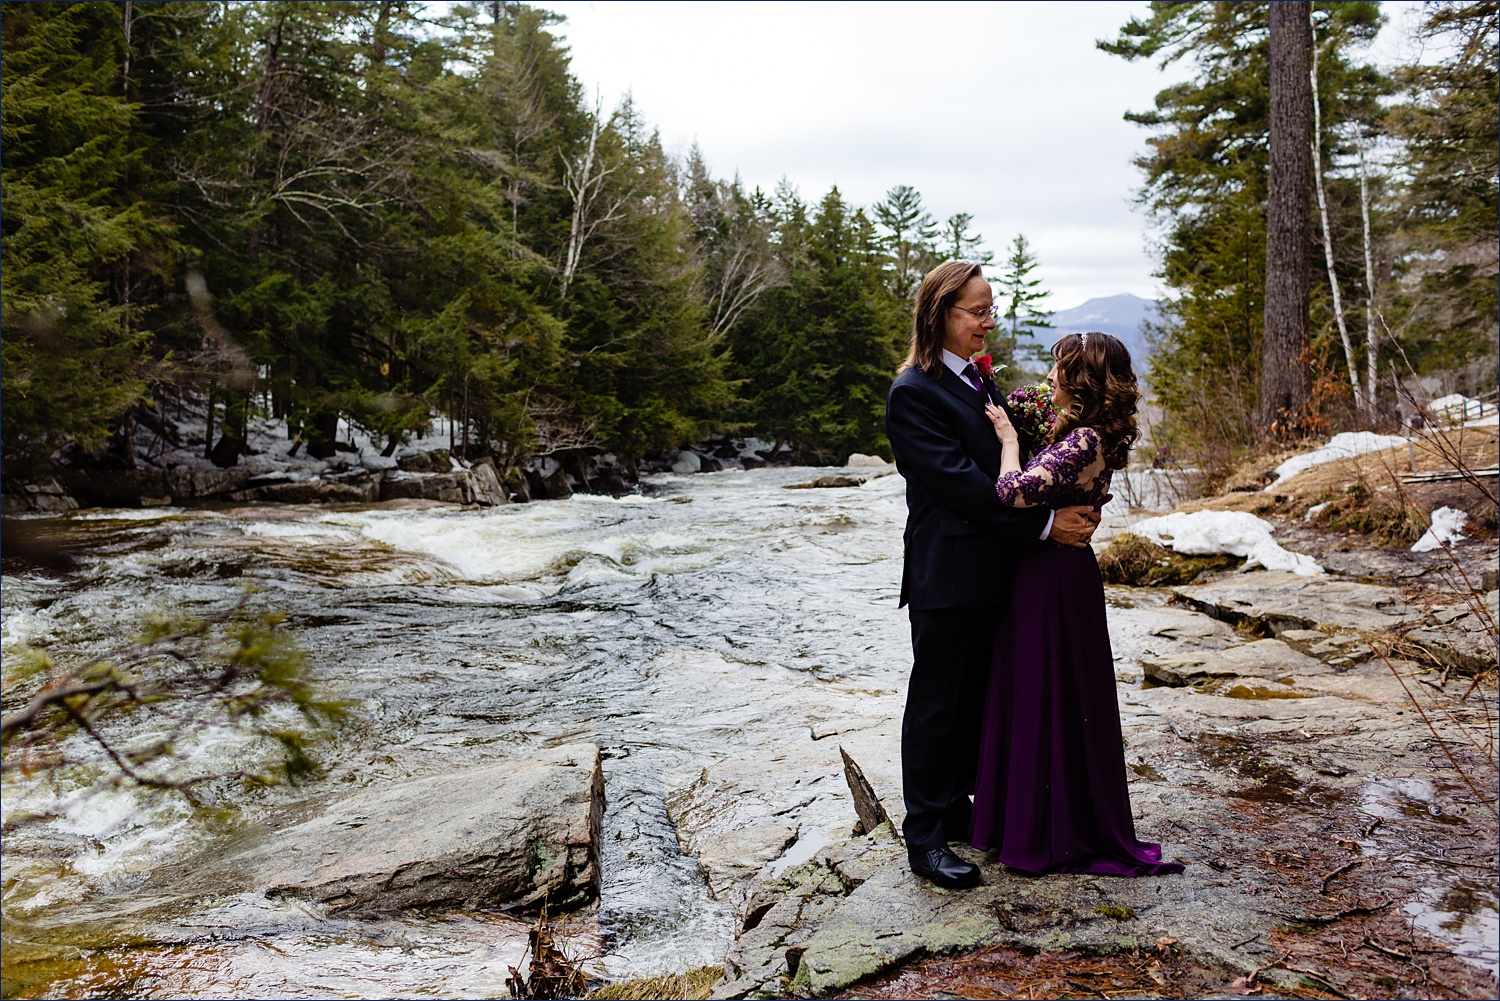 The newlyweds stand by Jackson Falls in the Spring chill air after their NH Elopement